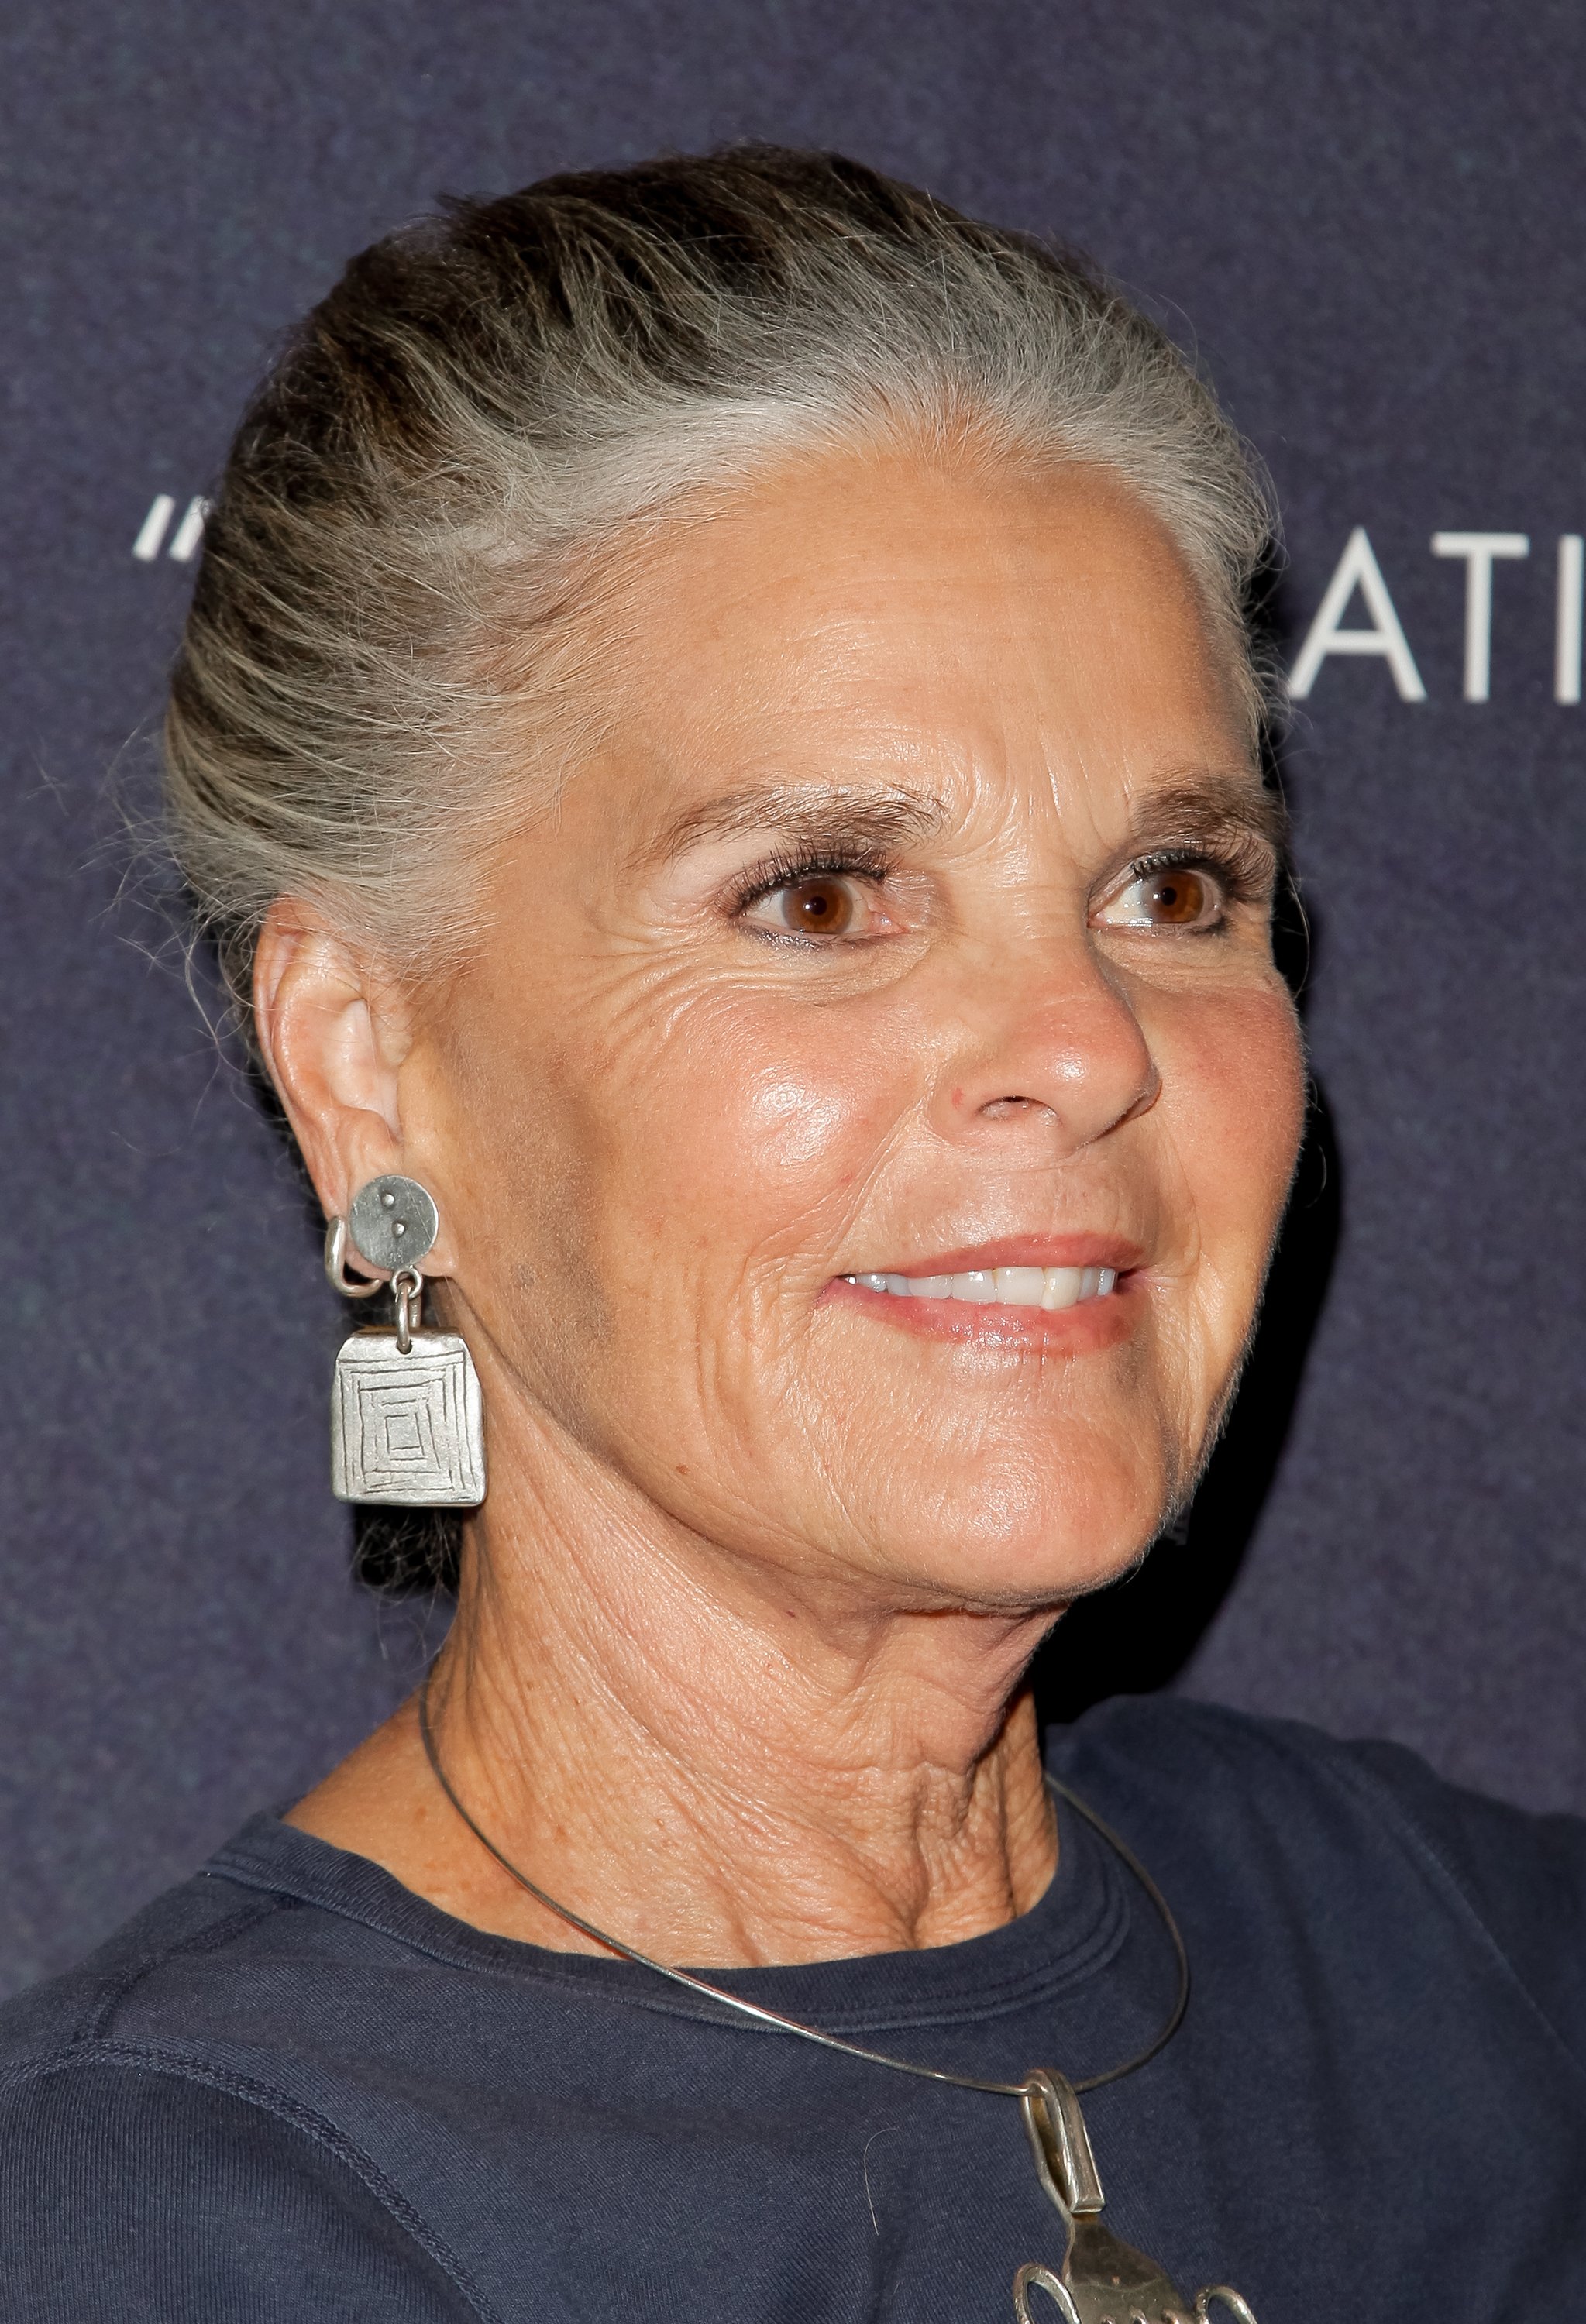 Ali MacGraw on October 14, 2015 in Beverly Hills, California. | Source: Getty Images